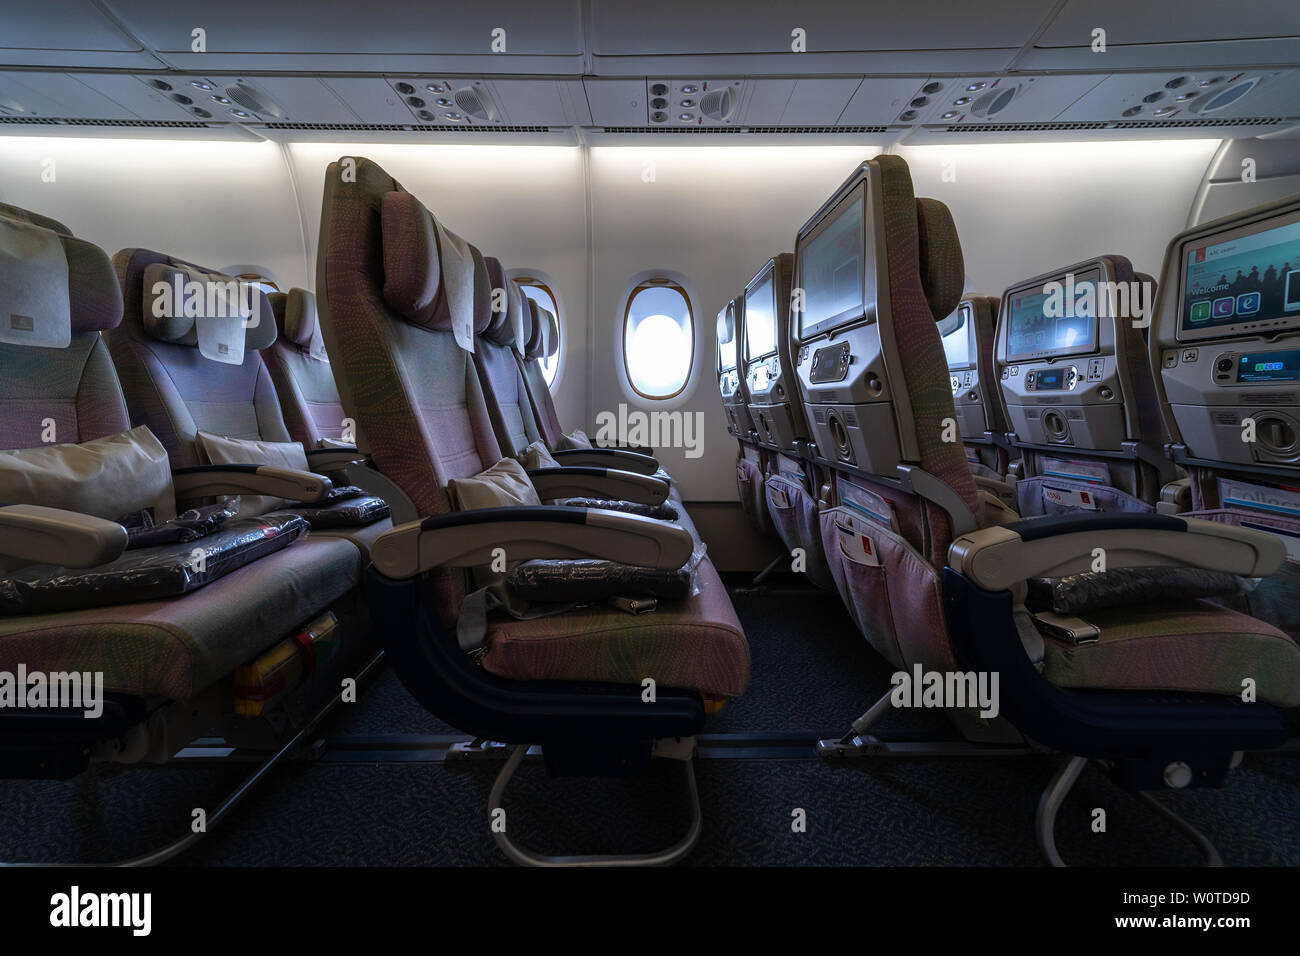 Berlin April 26 2018 Interior Of An Economy Class Of The